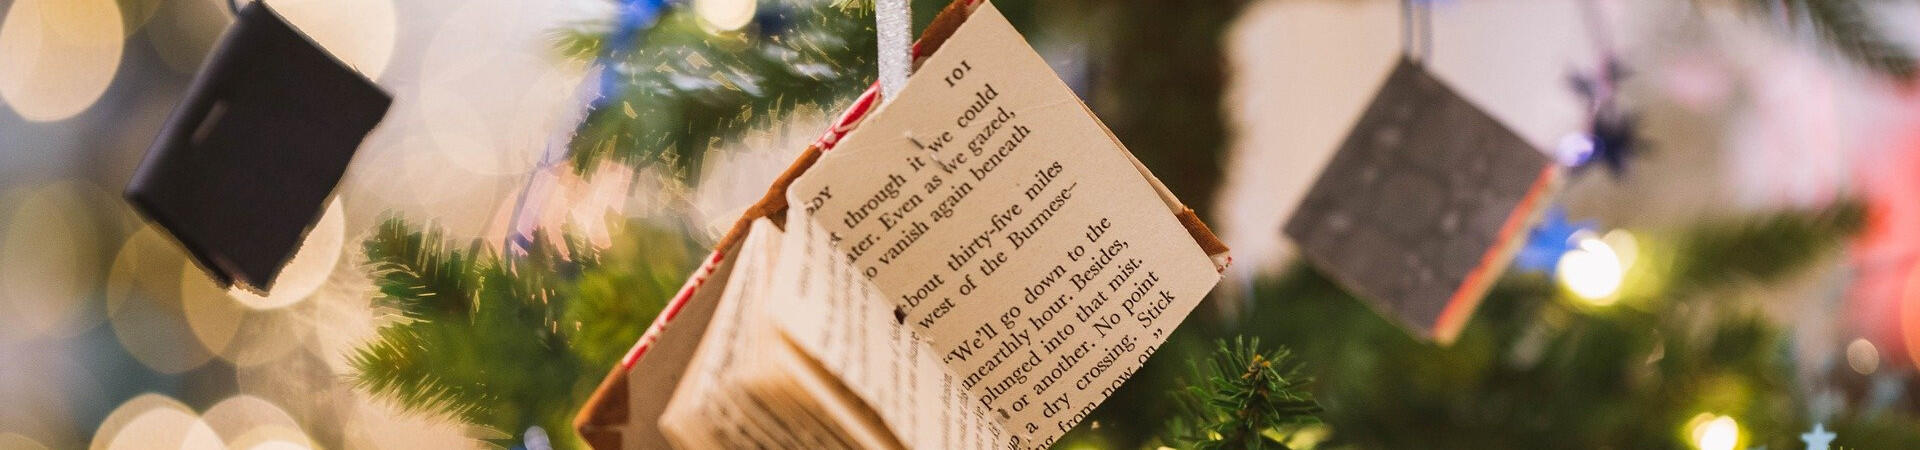 Christmas tree with hanging books